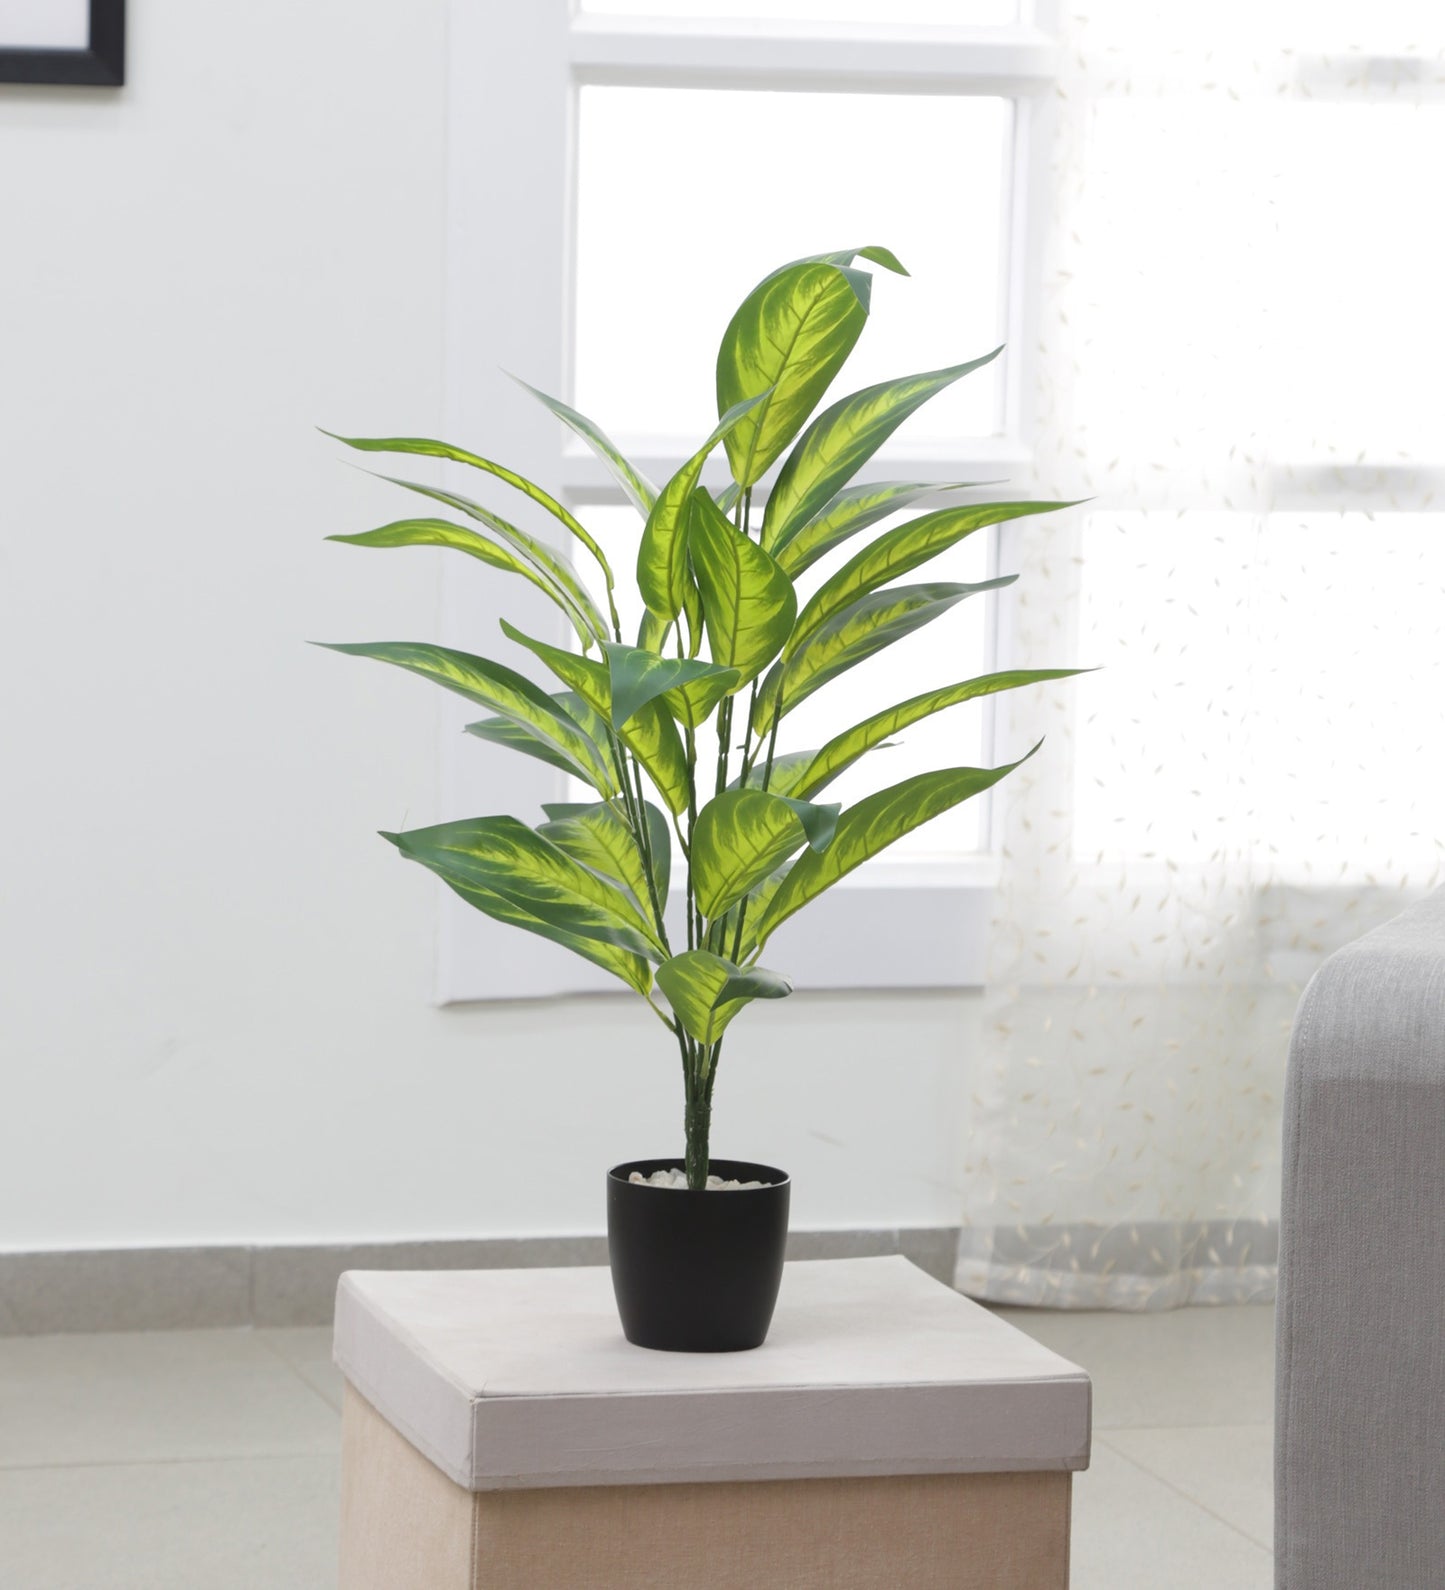 Decorative Artificial Dieffenbachia Tree Tropical Fake Plants for Home Garden Outdoor Indoor Decoration (With Pot, 70 cm Tall)